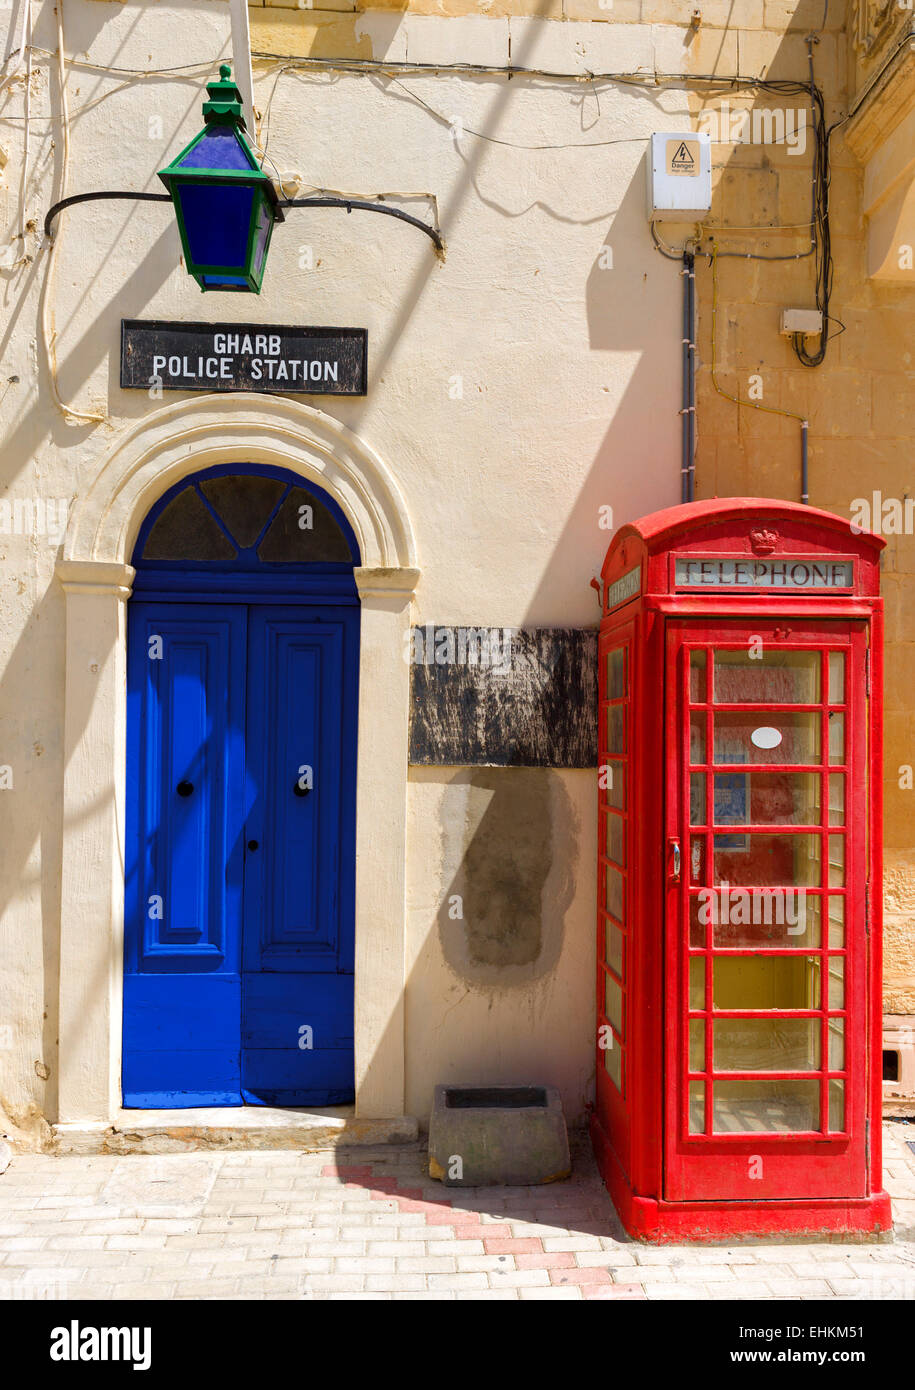 Police Station and old phone box, Main Square, Gharb, Gozo, Malta Stock Photo